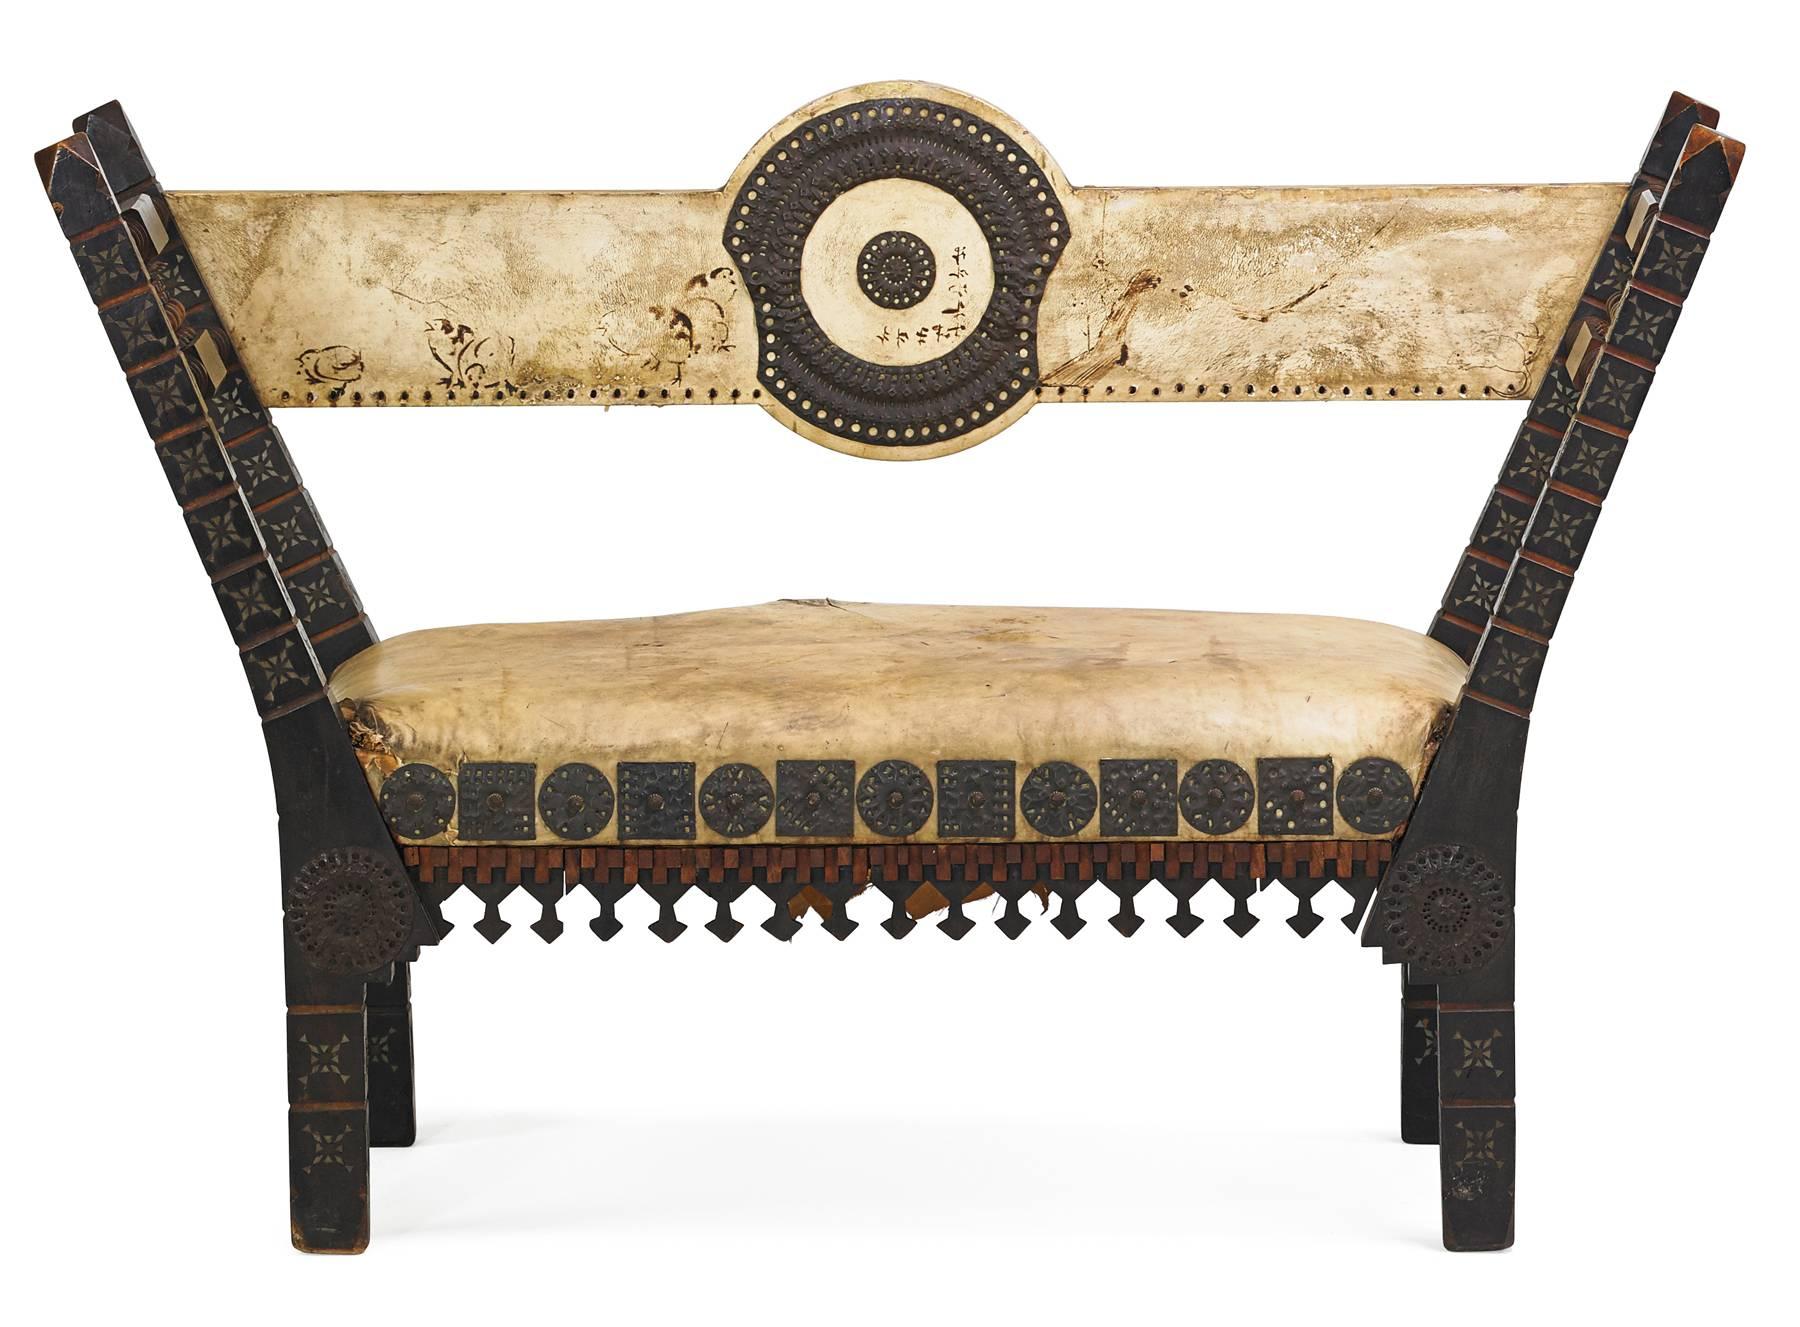 Ebonised walnut settee by Carlo Bugatti (1856-1940) decorated with pewter and brass inlay and embossed copper, upholstered with parchment.

Carlo Bugatti was a famous designer active at the turn of the century. His pieces are rare and highly